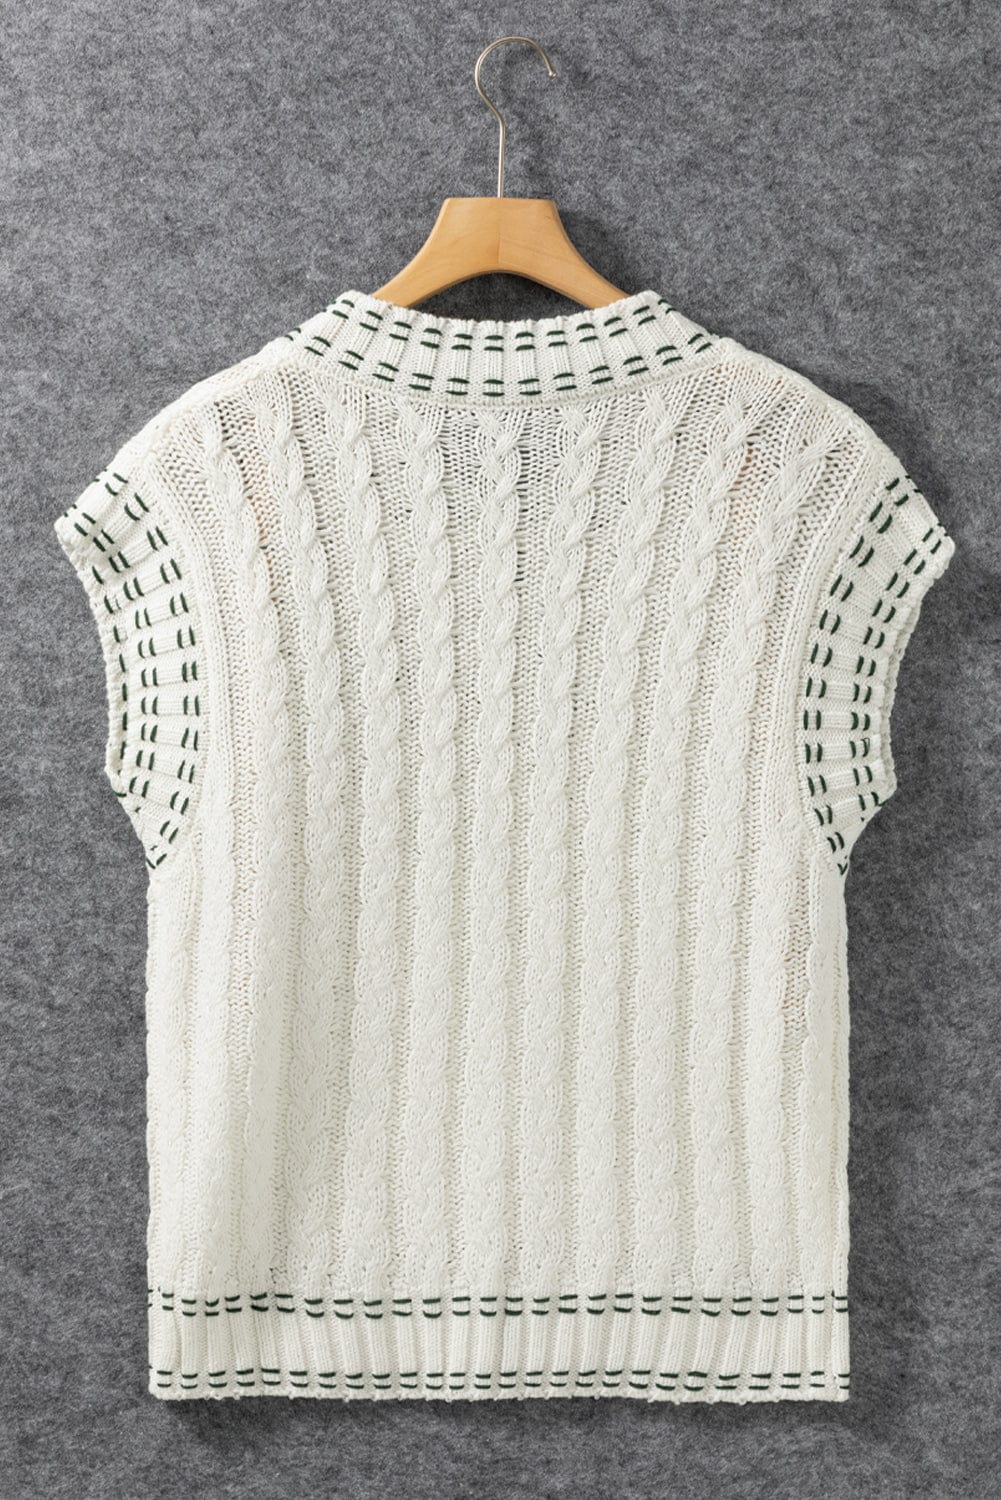 The802Gypsy  Tops White Contrast Trim V Neck Cable Knit Sweater Vest